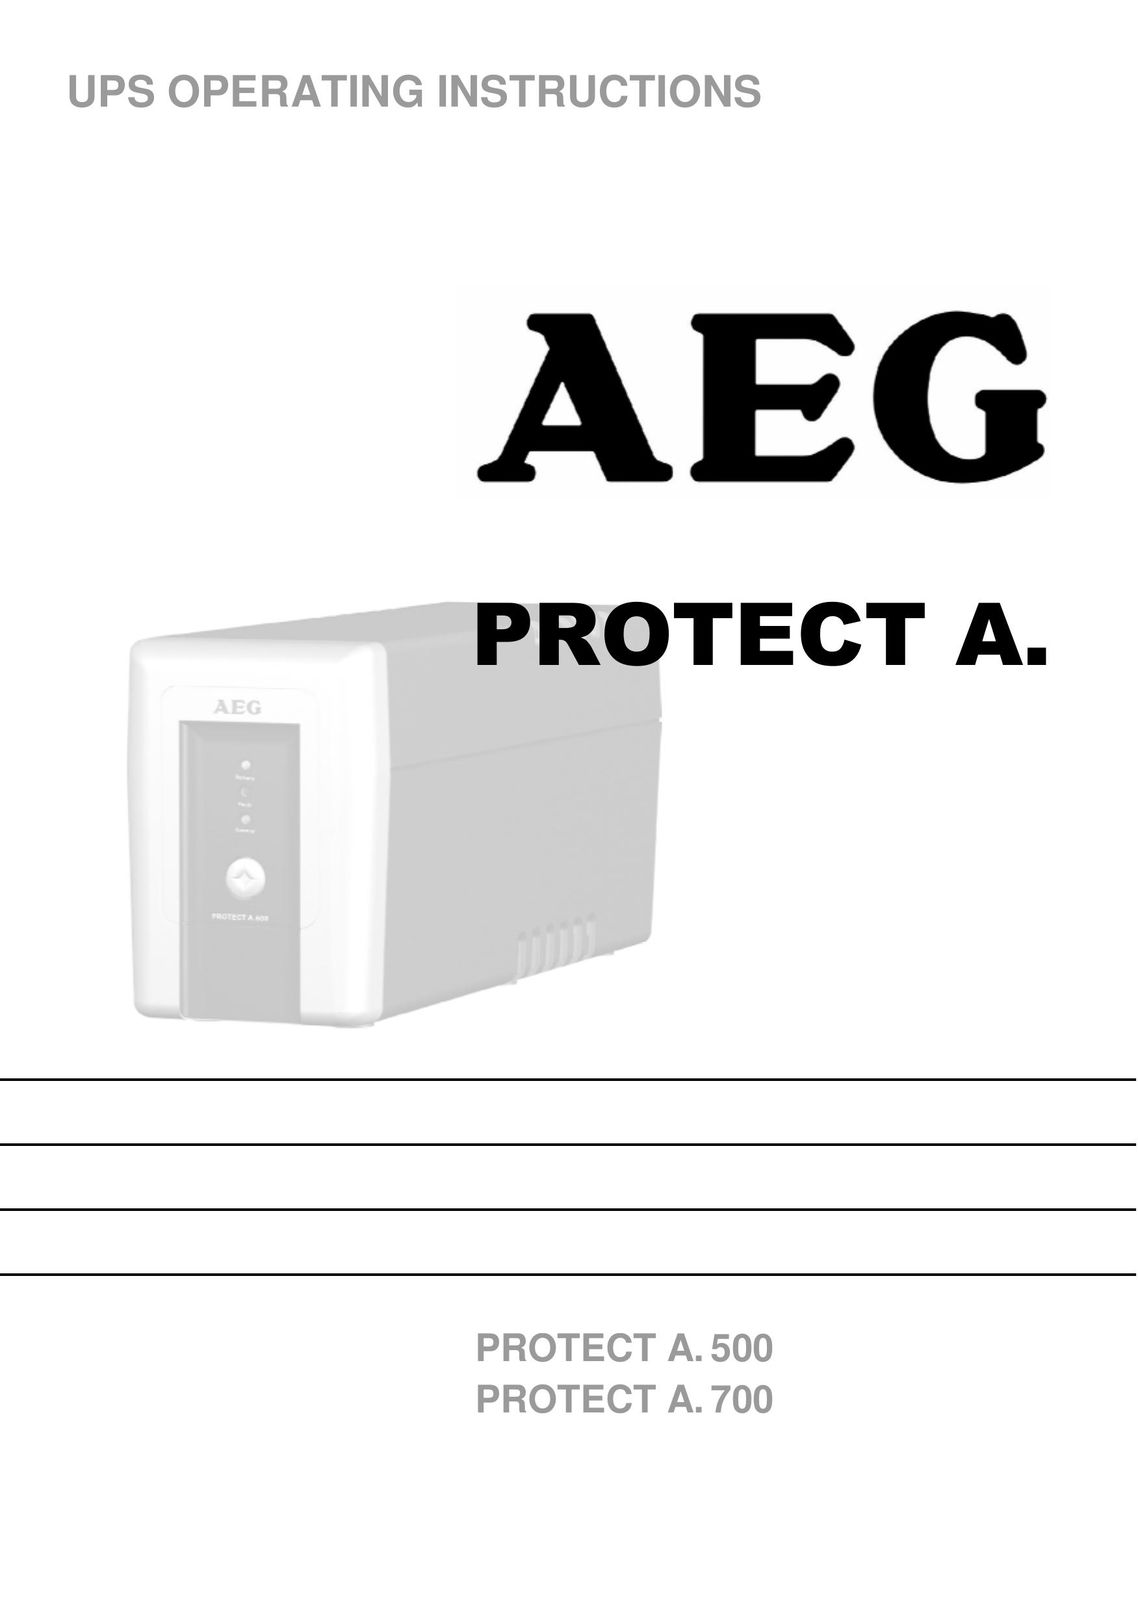 AEG PROTECT A. 500 Power Supply User Manual